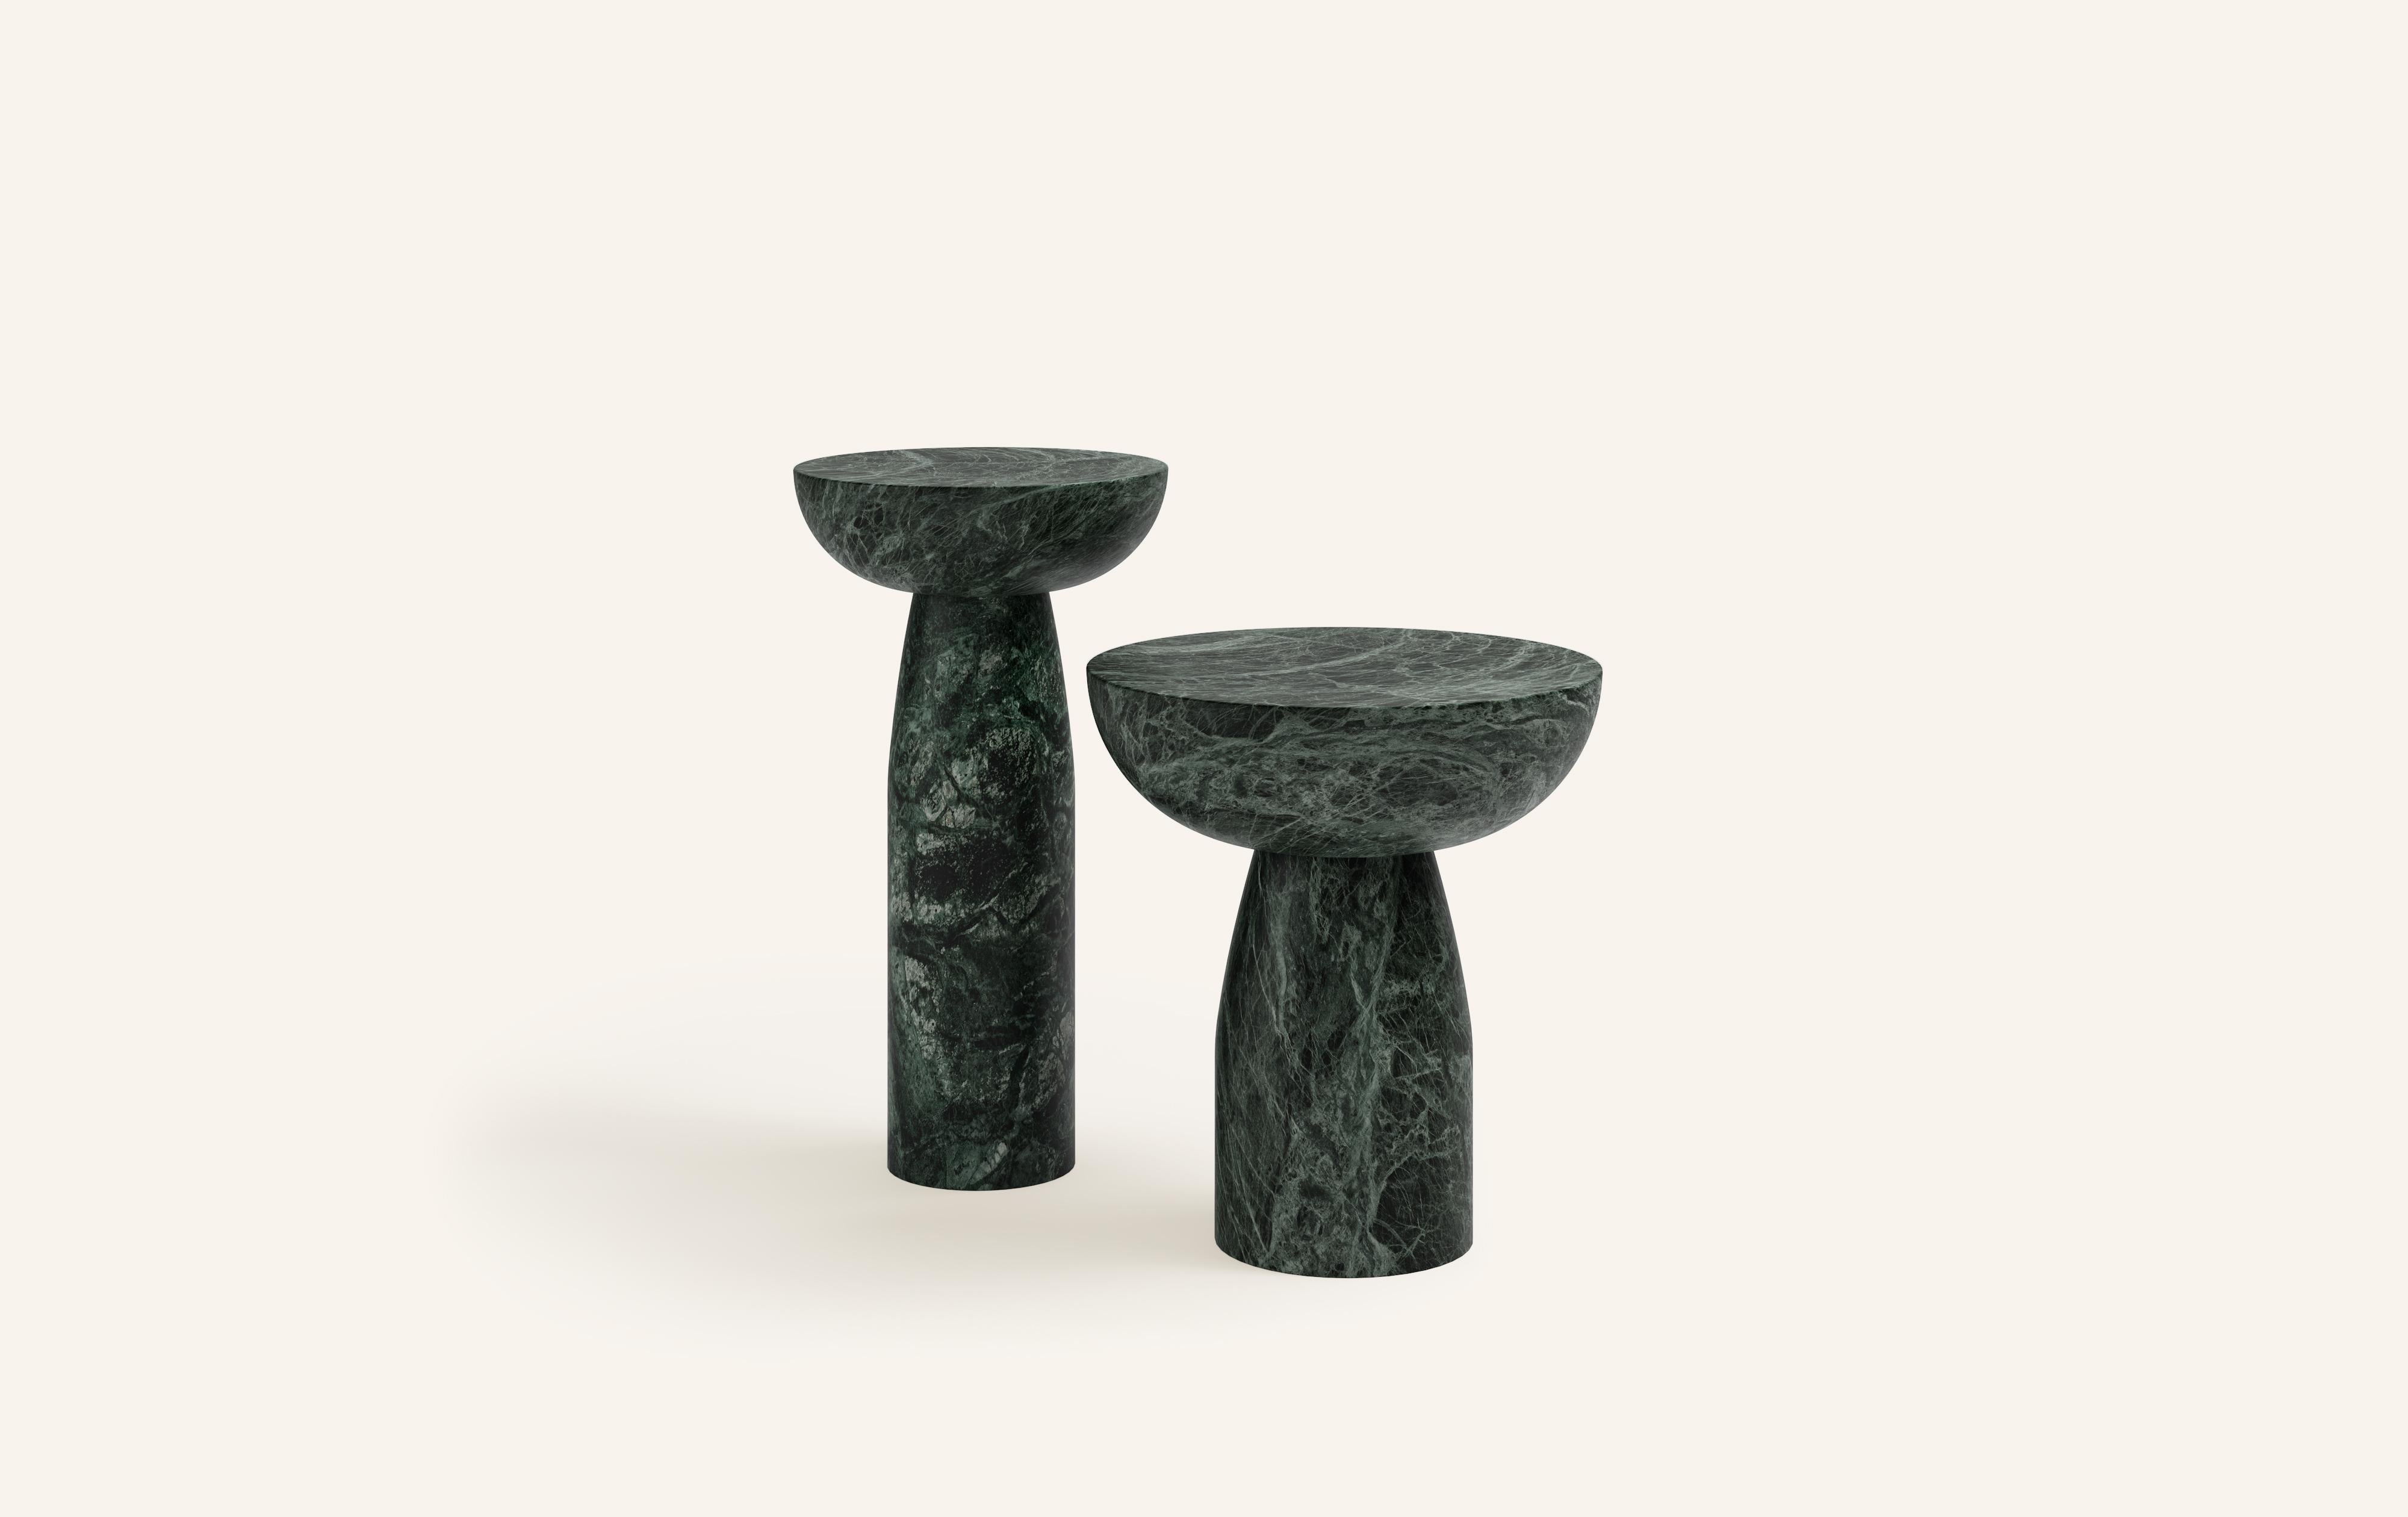 A SLICE OF A ’SPHERE’ OR 'SFERA' IN ITALIAN BALANCES A FLAT SURFACE ATOP AND ROBUST MONOLITH FORM. WITH A BASE SOFTENED BY A CURVED PROFILE, SFERA IS SOFT AND EARTHY IN ITS AVAILABLE STONE SELECTIONS.

DIMENSIONS: (SIDE TABLES SOLD